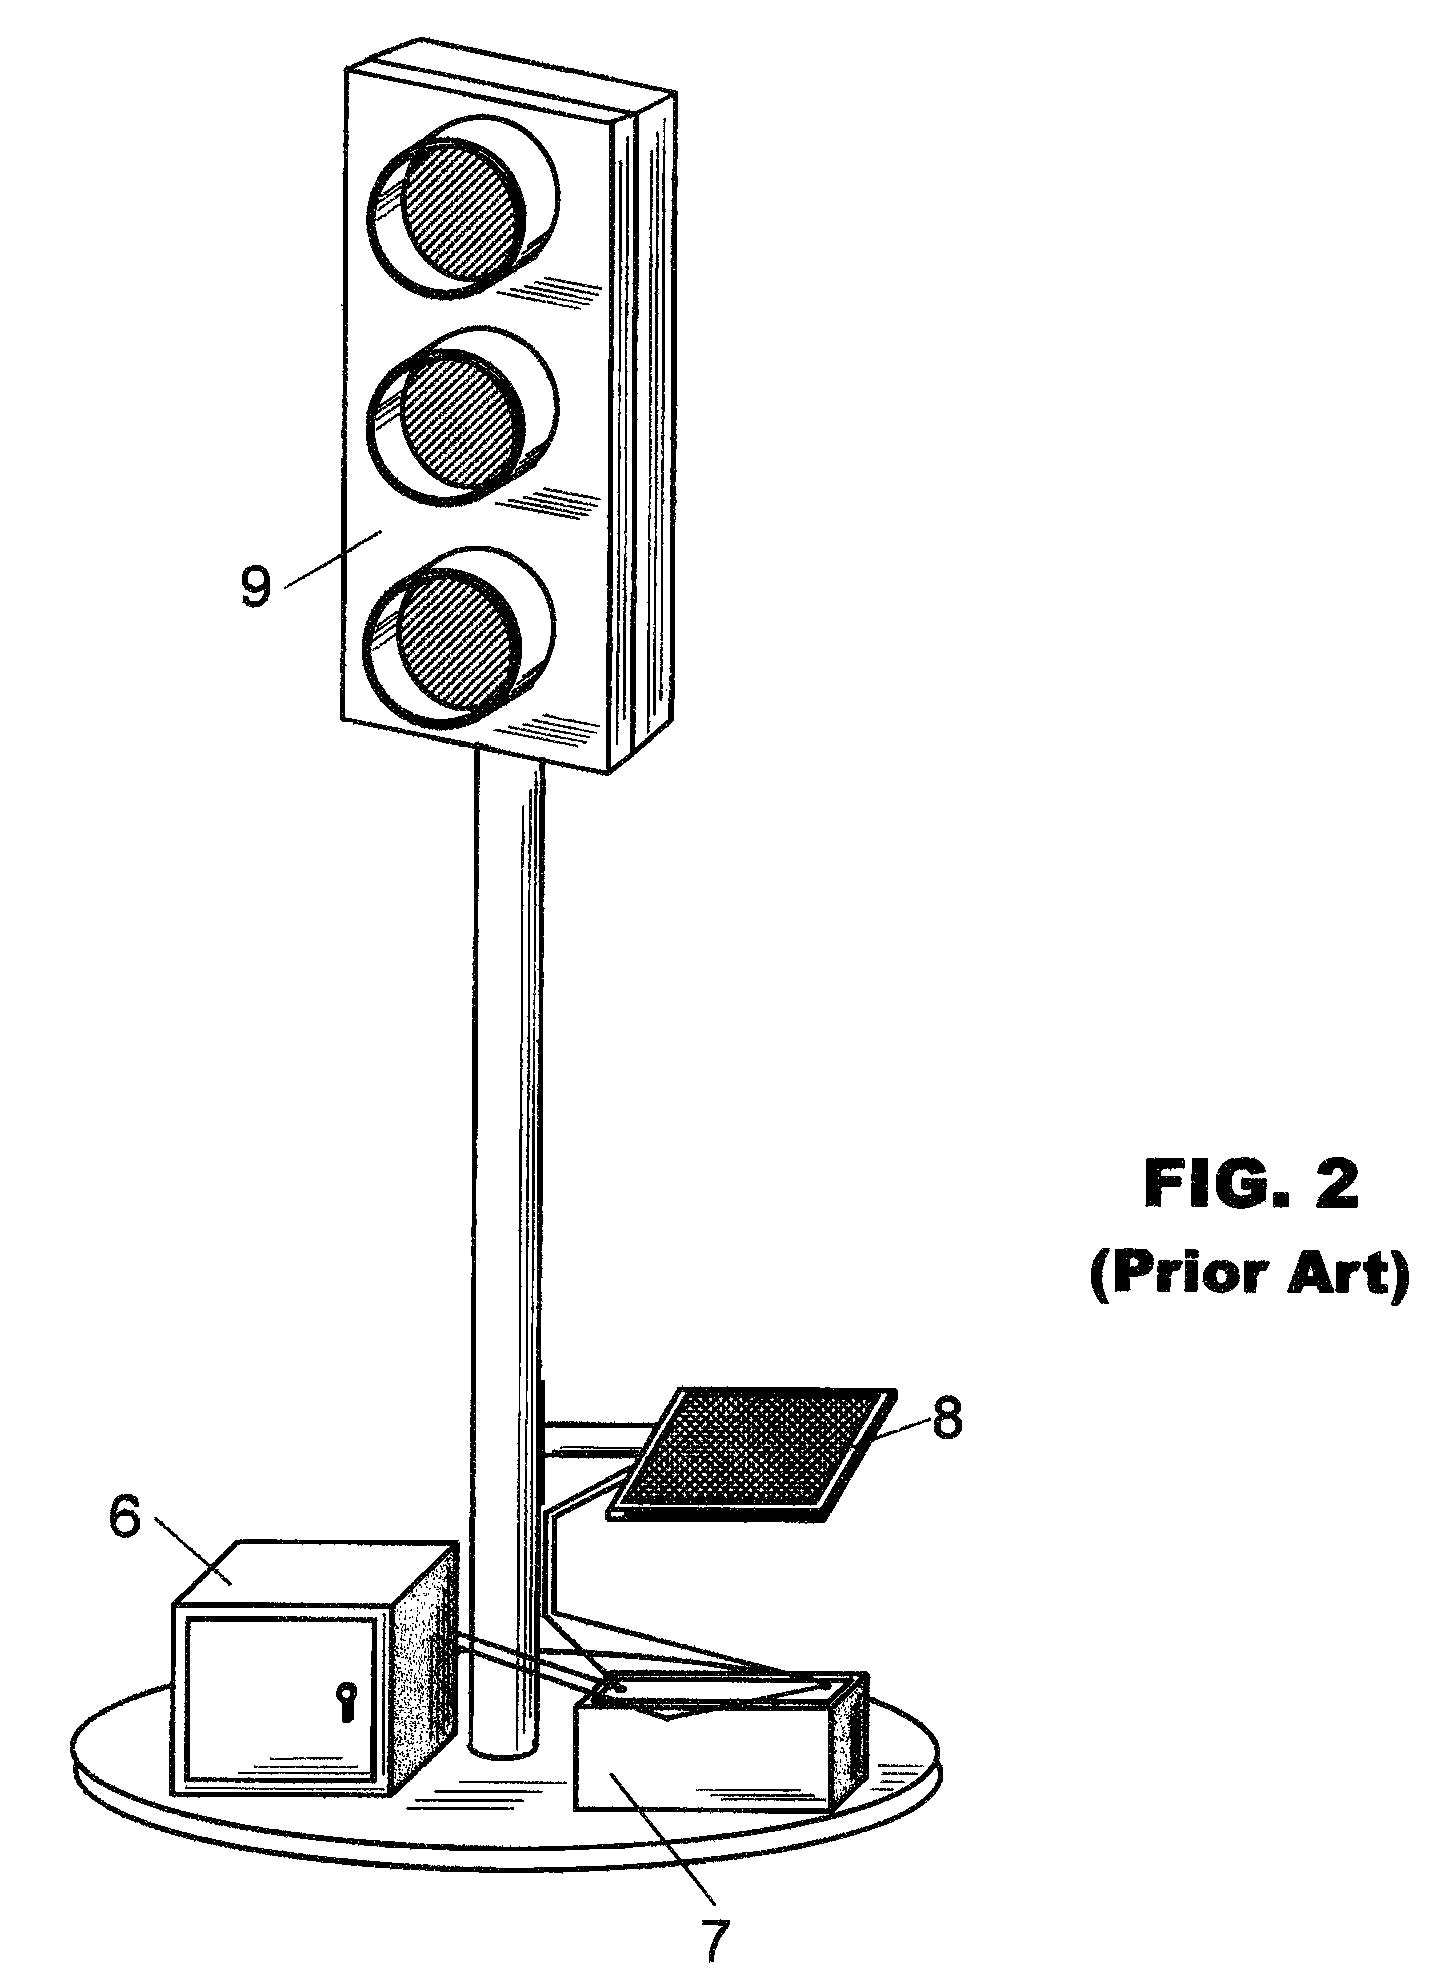 Method and apparatus for controlling temporary traffic signals